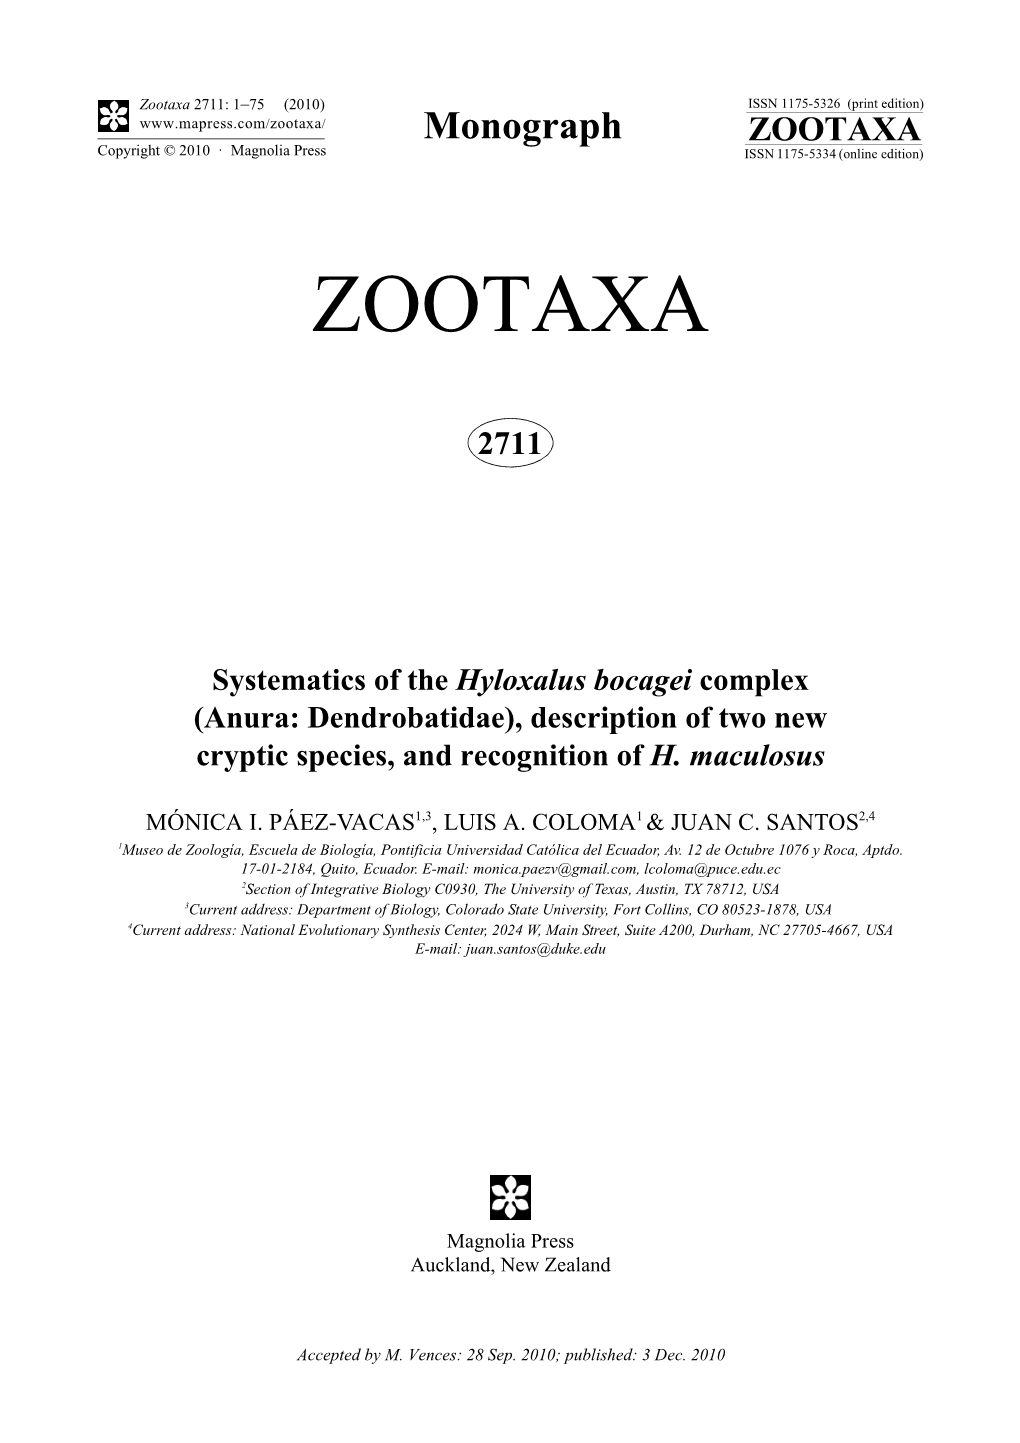 Systematics of the Hyloxalus Bocagei Complex (Anura: Dendrobatidae), Description of Two New Cryptic Species, and Recognition of H